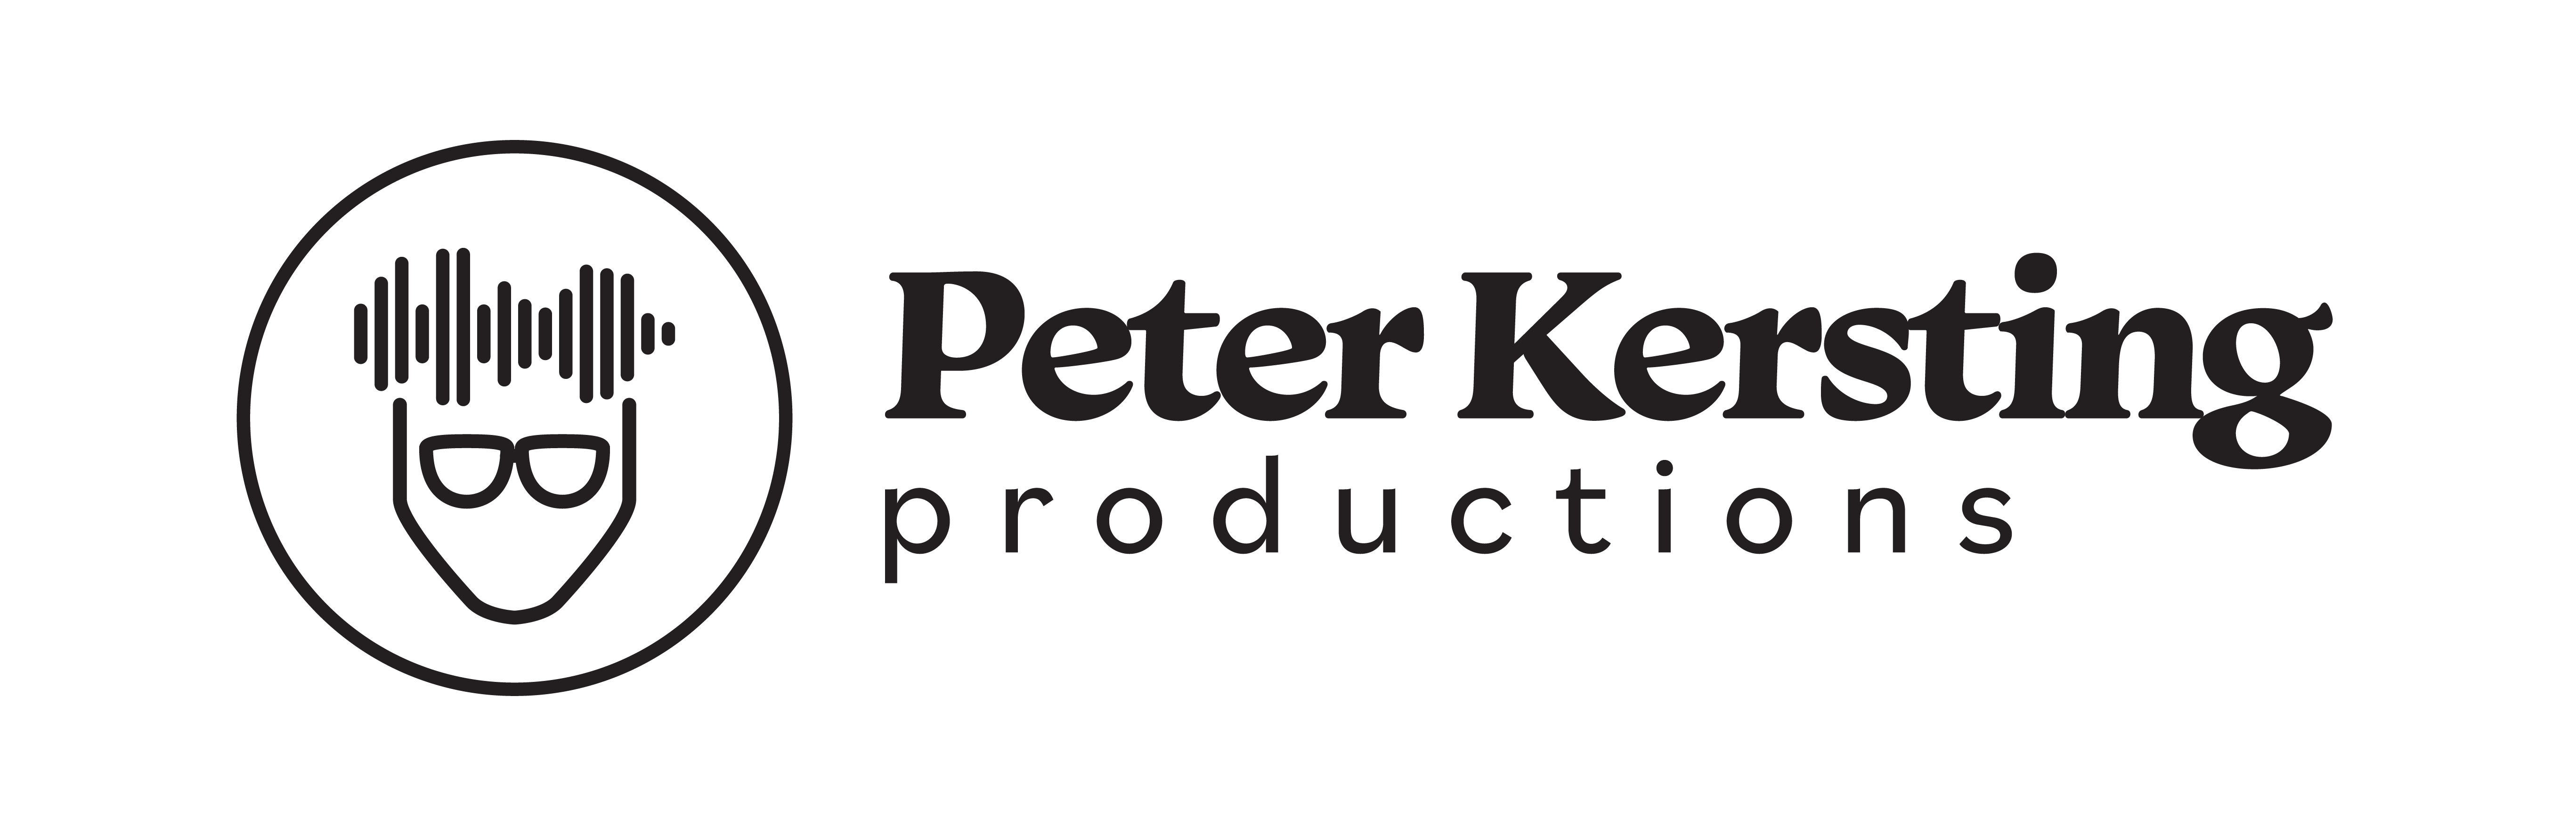 Peter Kersting Productions